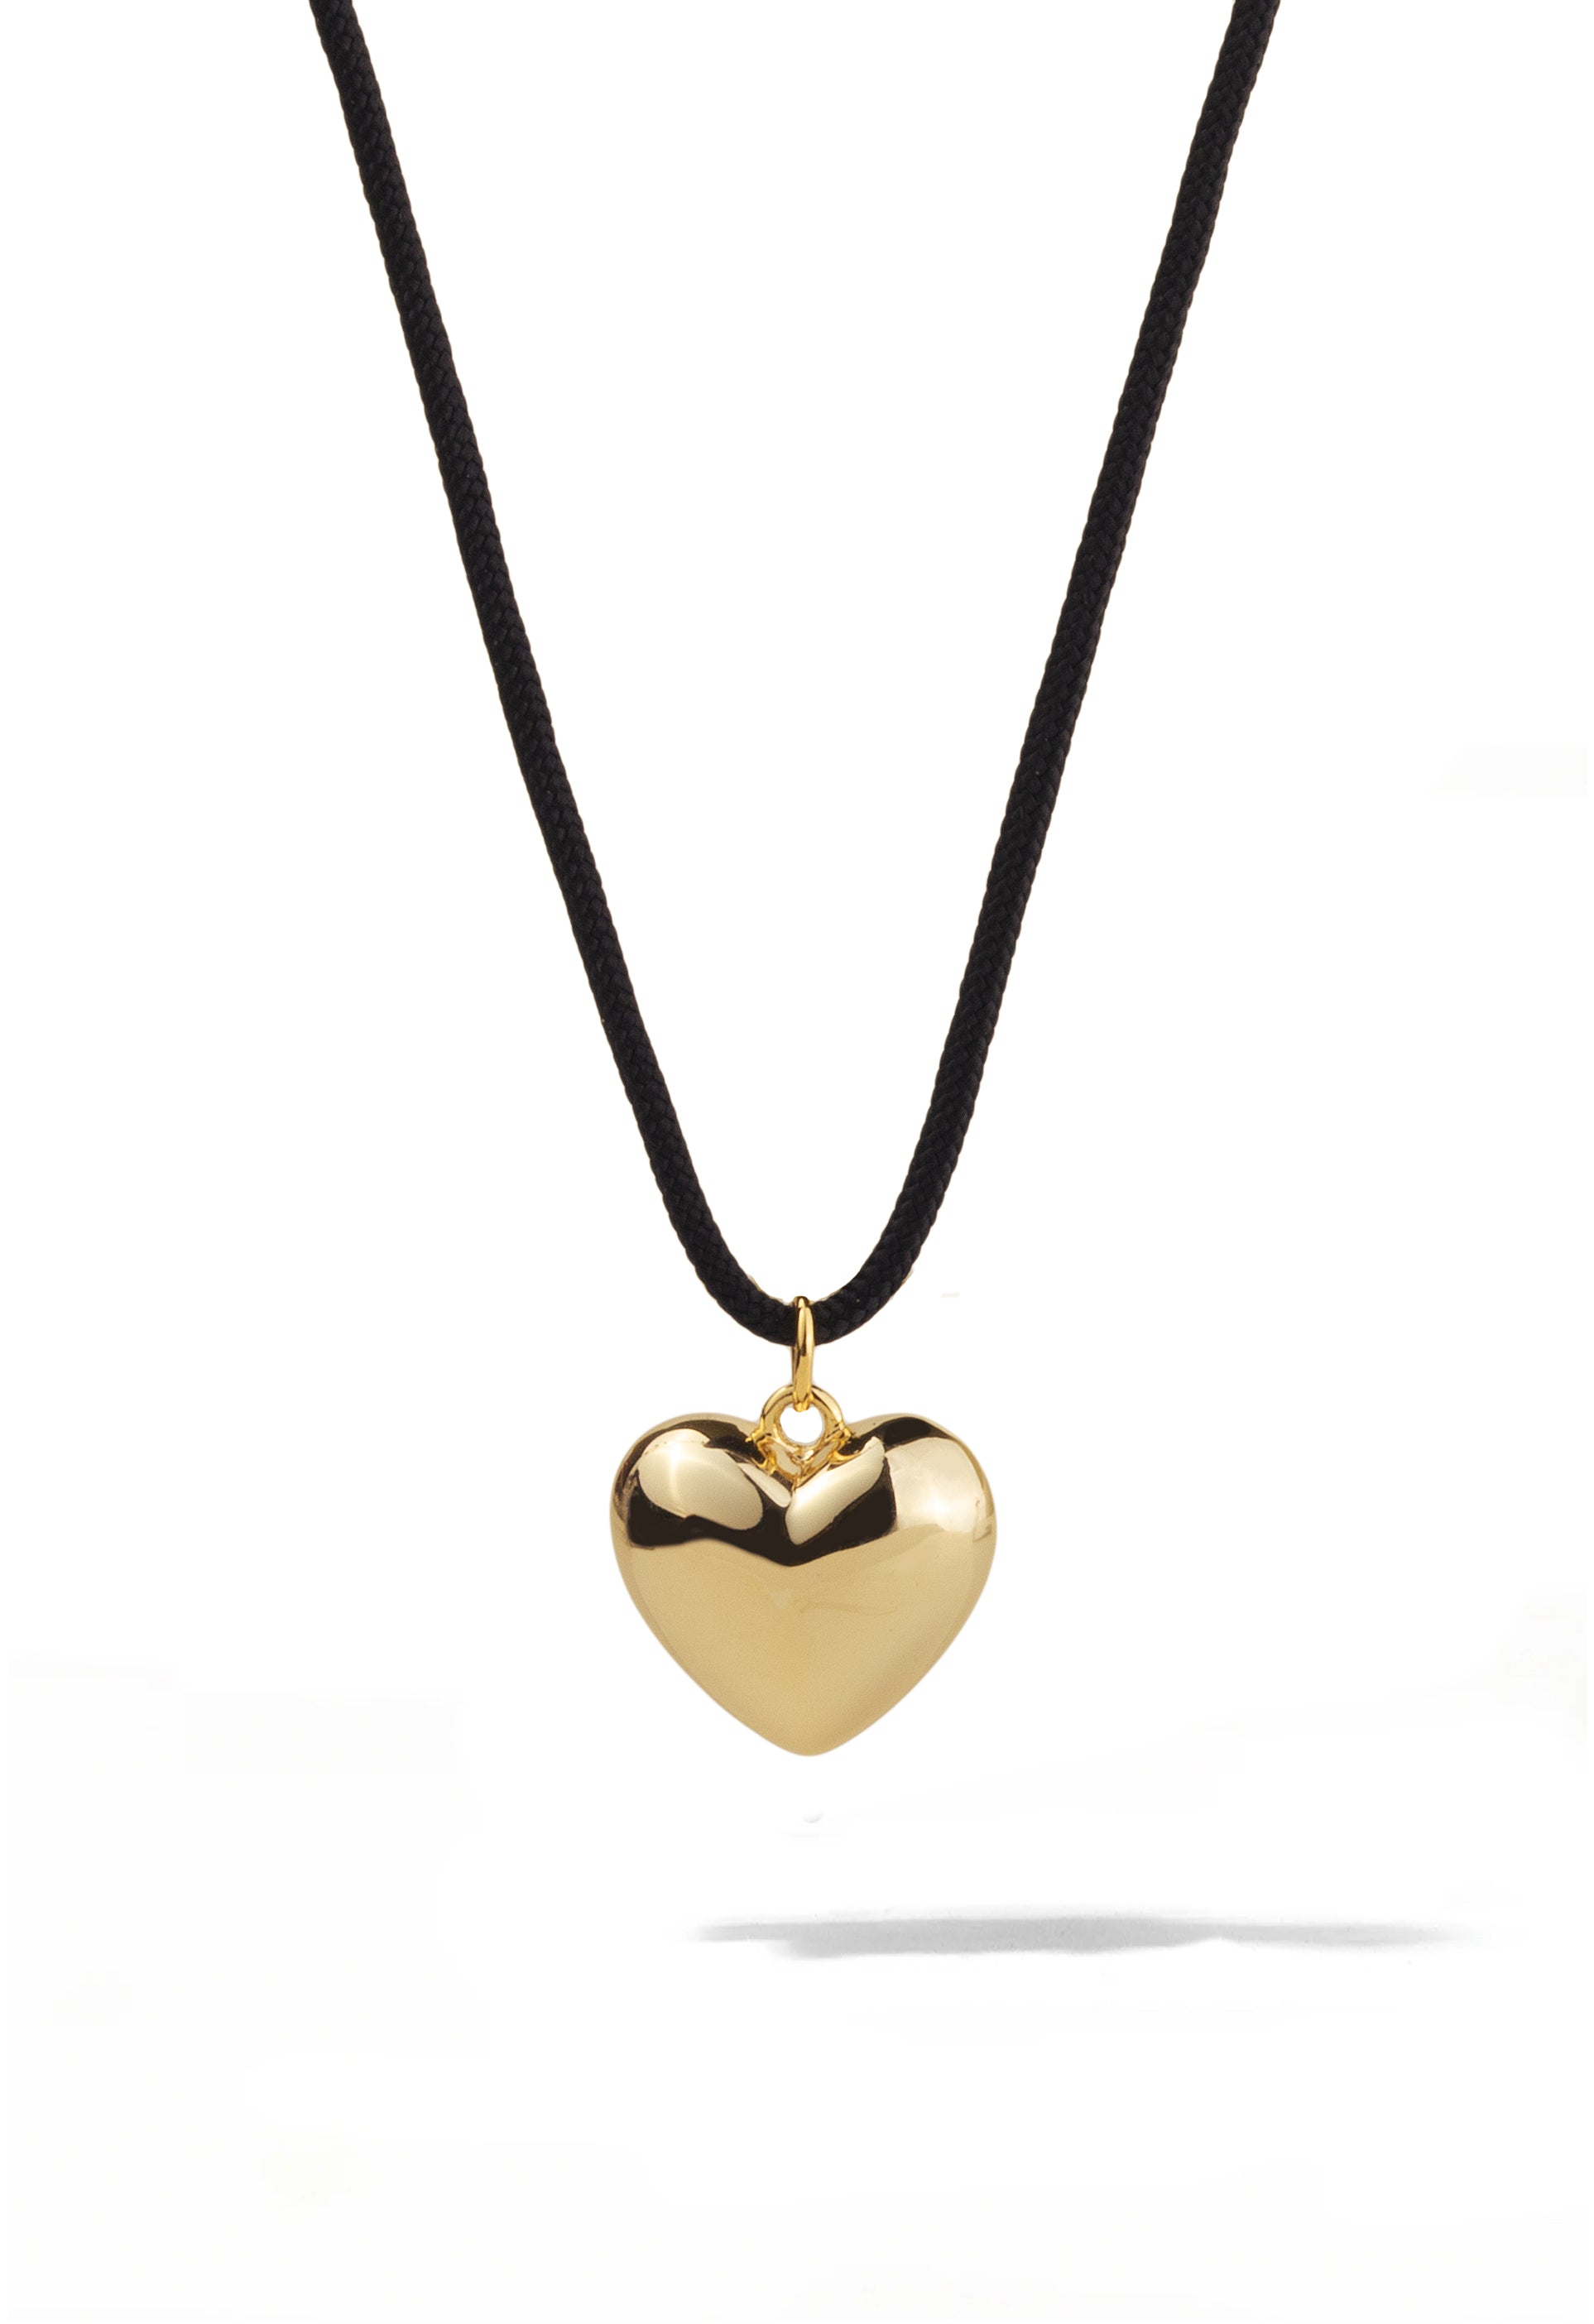 925 Silver Petite Puffed Heart Necklace – In free land